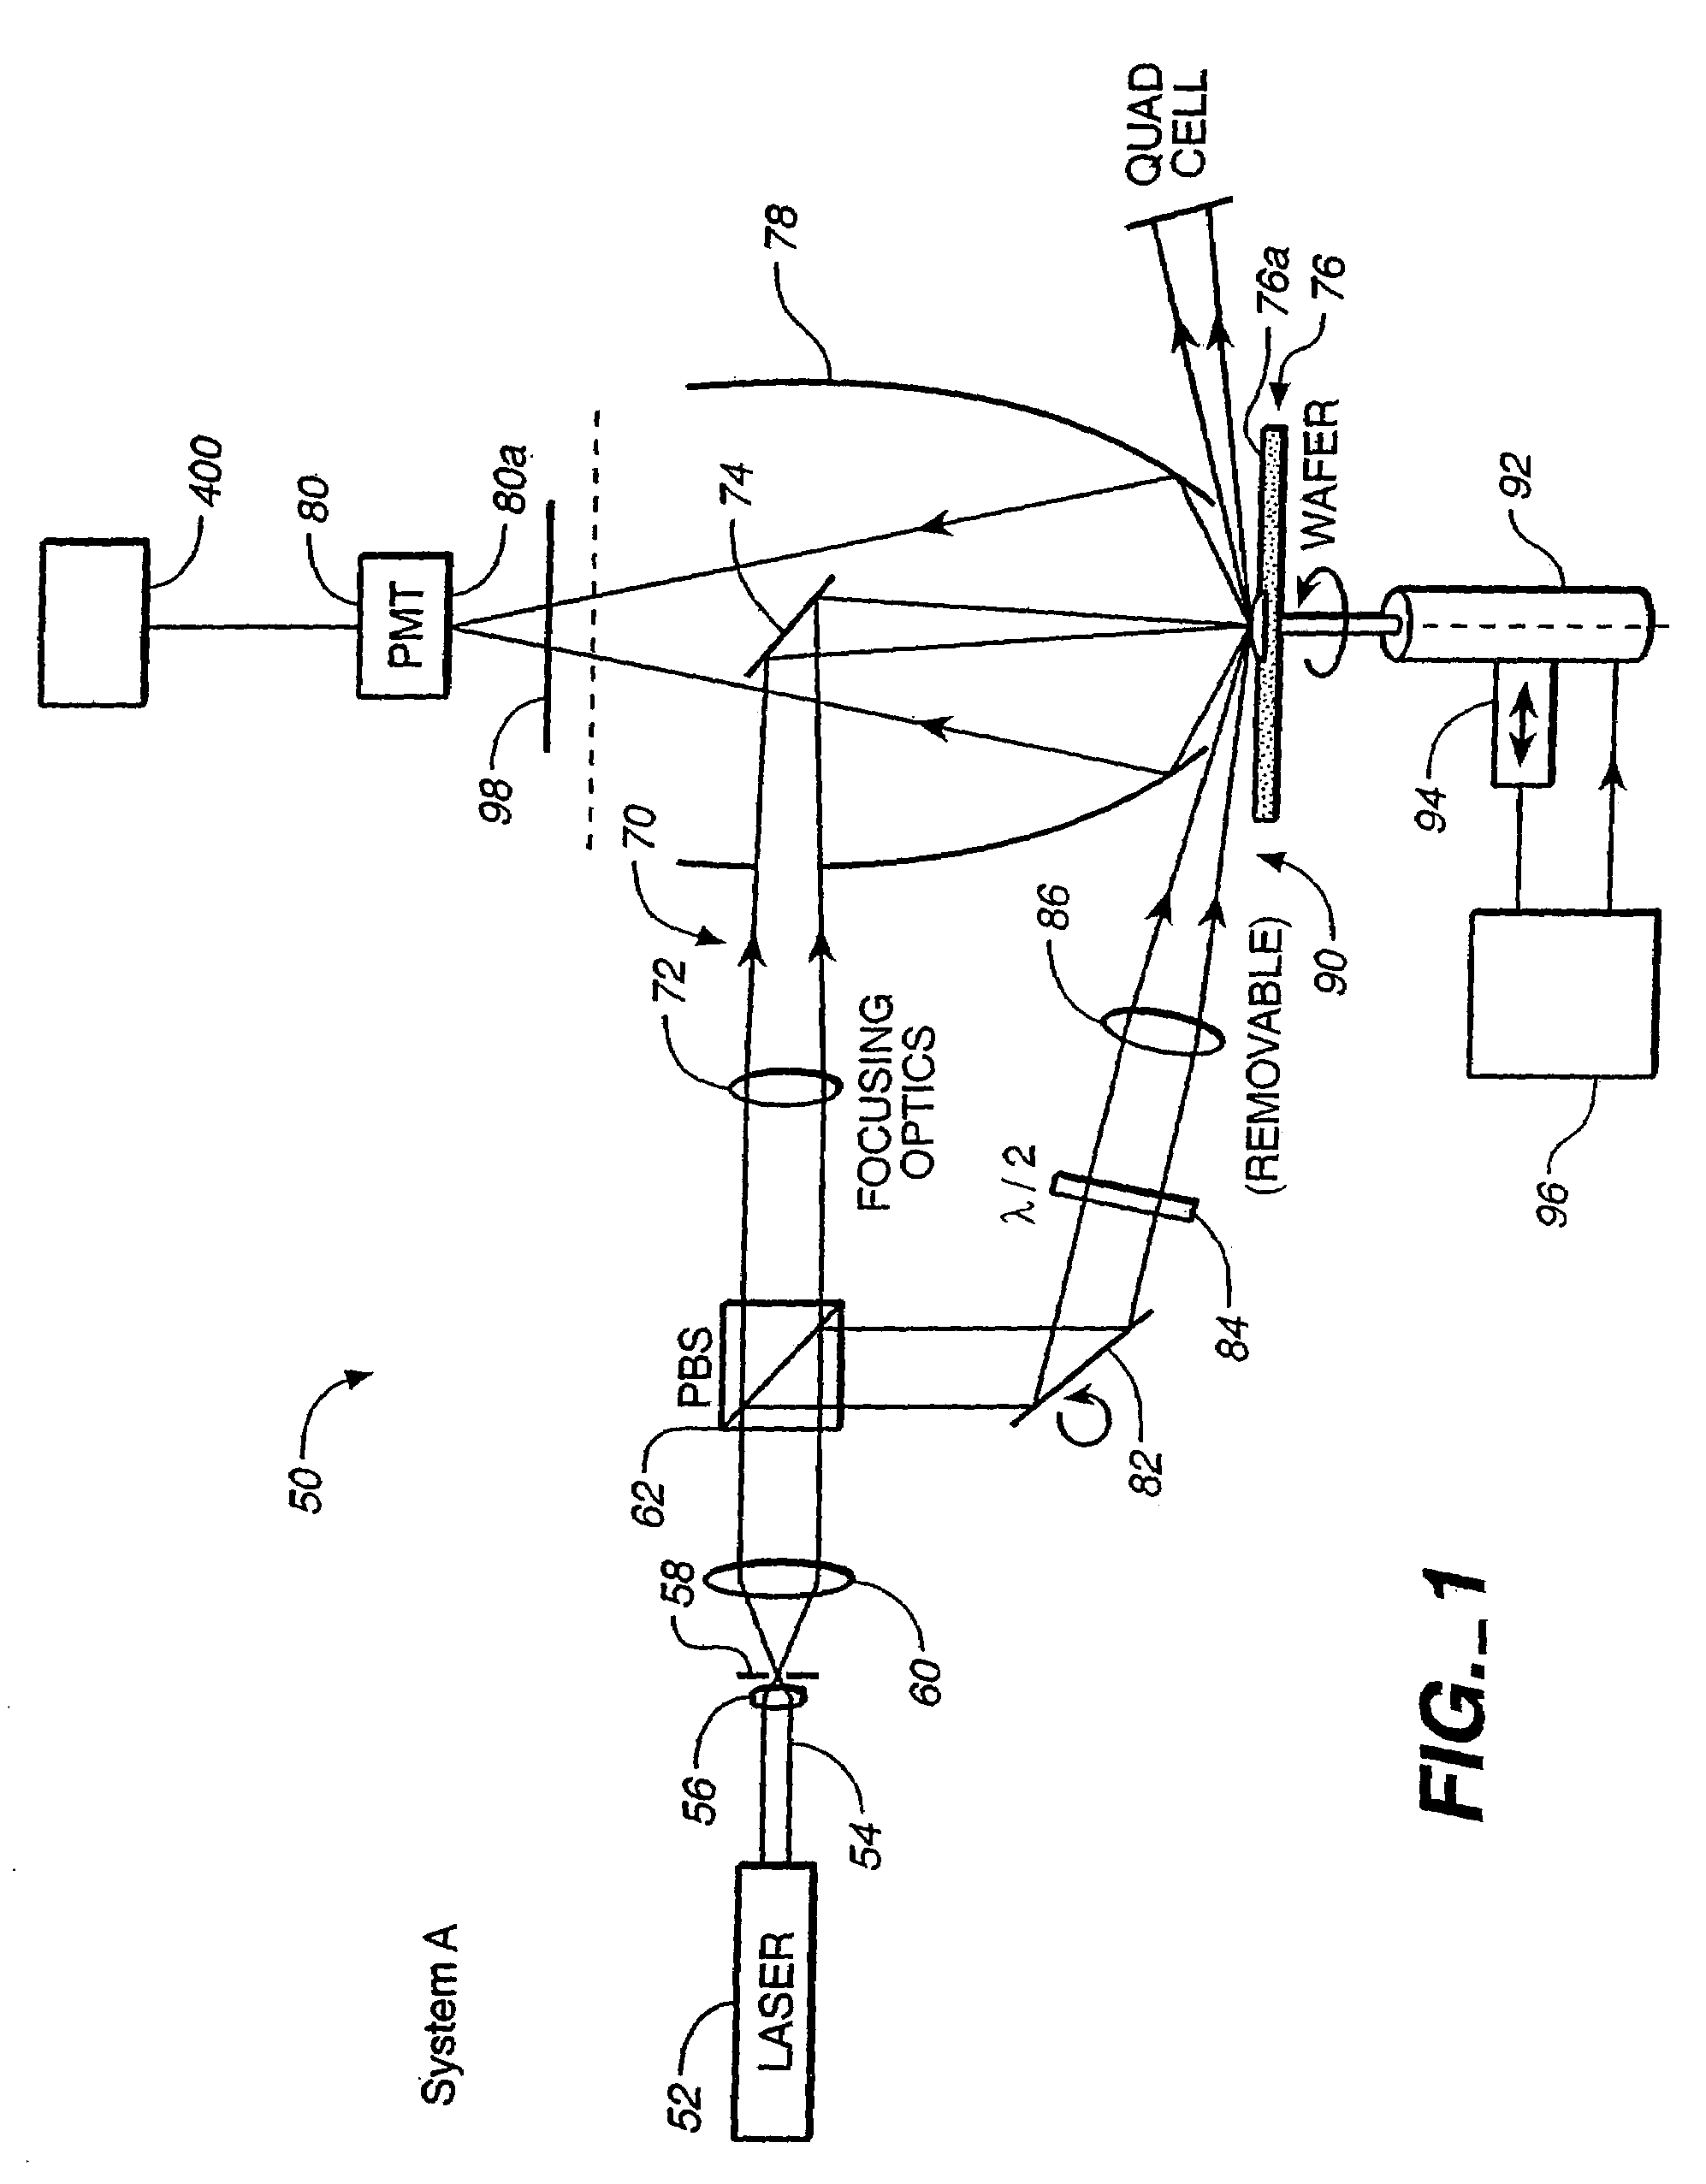 System and methods for classifying anomalies of sample surfaces